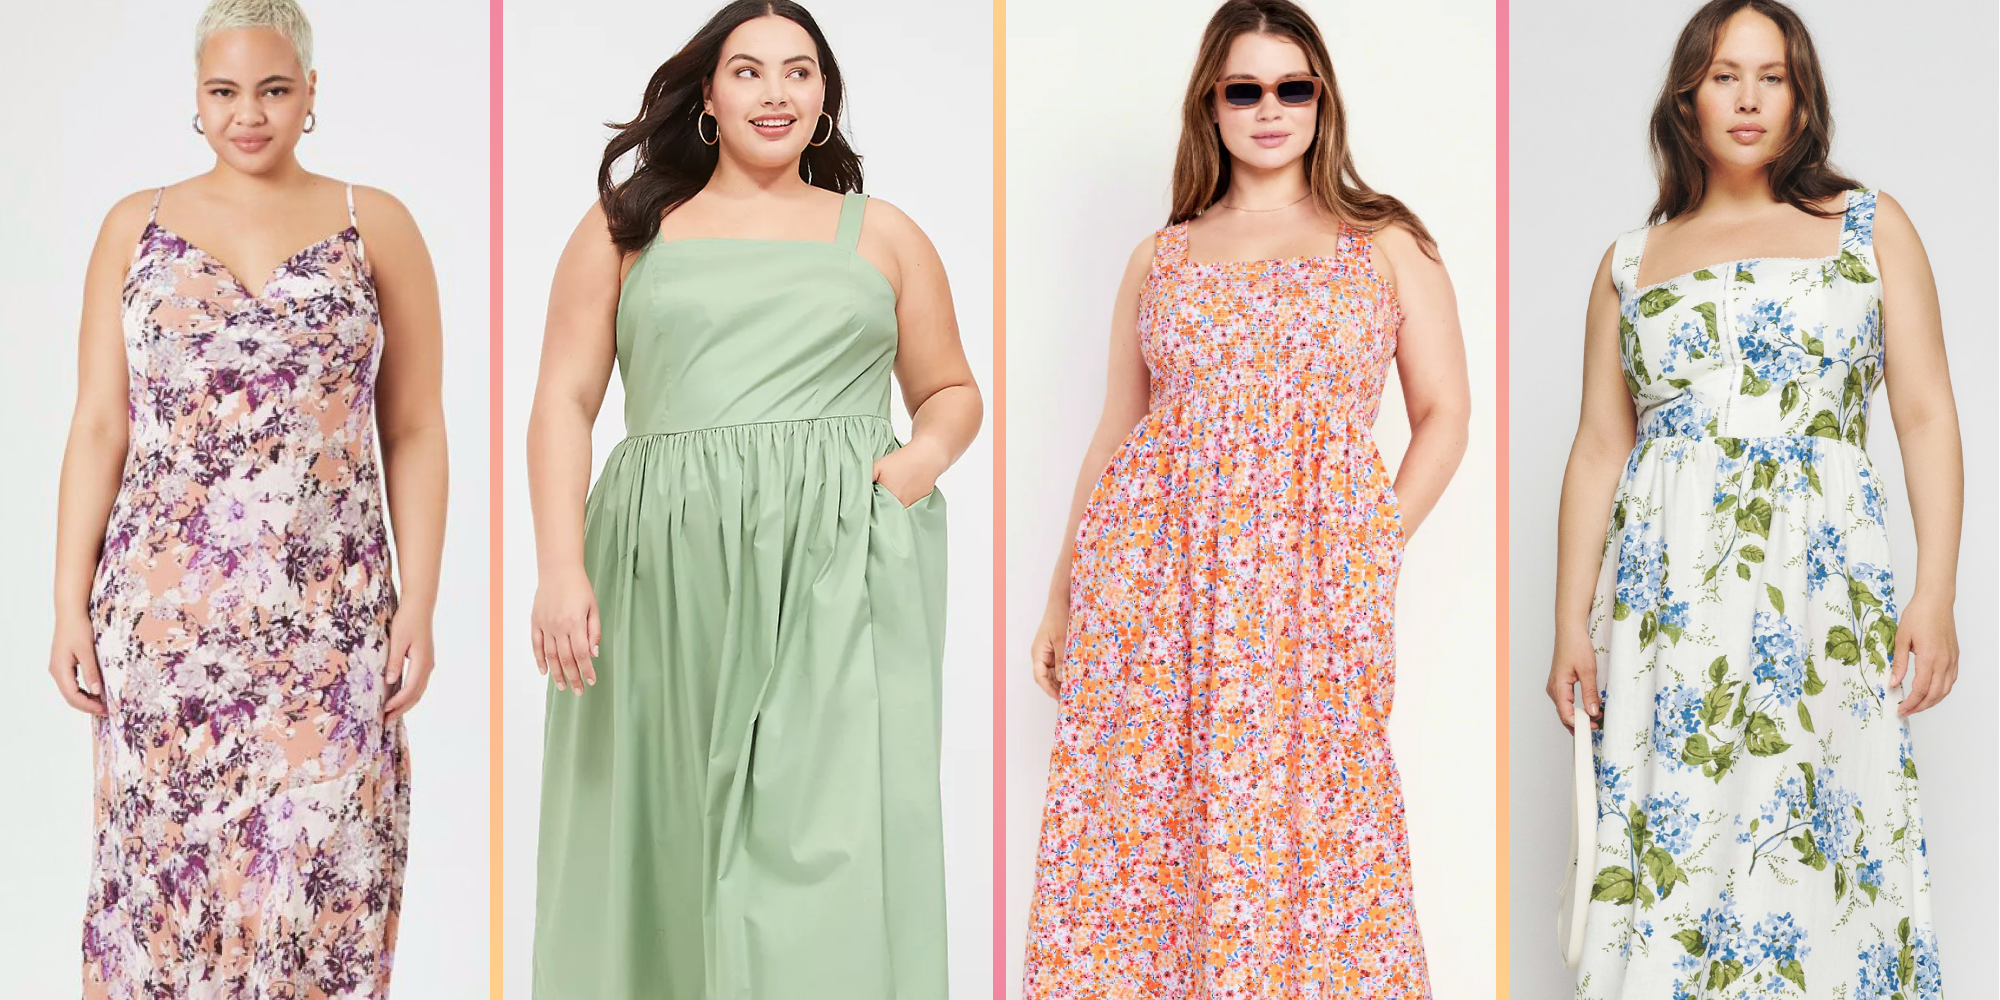 20 Cute Easter Dresses for Women - Best Grown-Up Easter Outfits